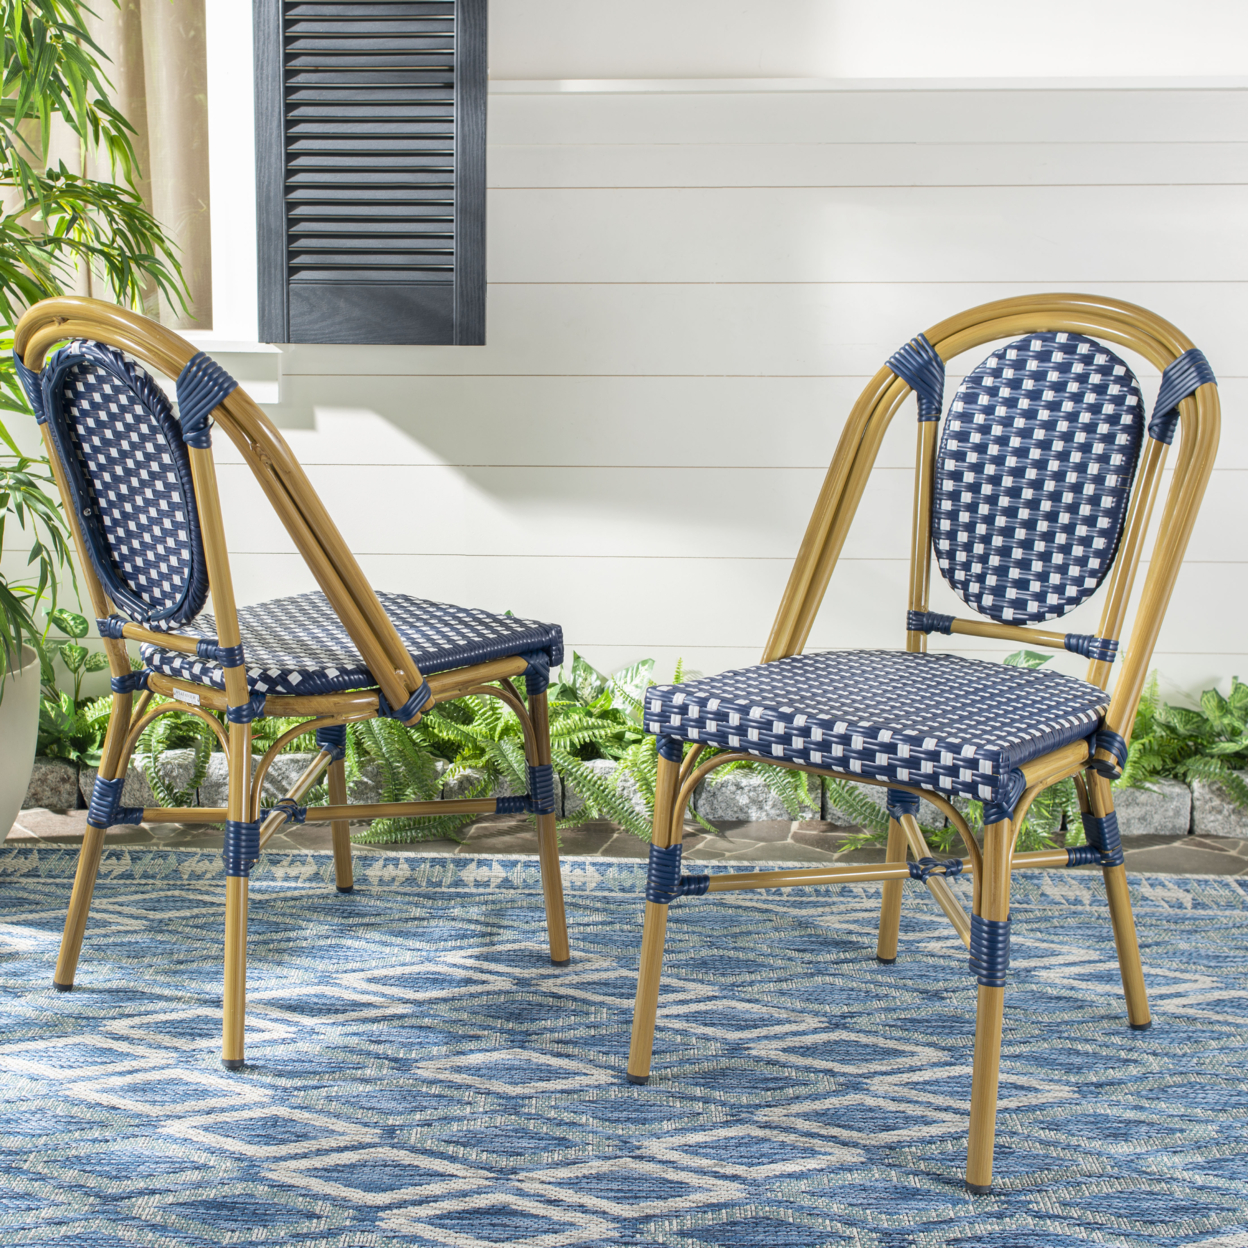 SAFAVIEH Lenda Outdoor Patio French Bistro Stackable Chair, Navy/White/Brown, Set of 2 - image 1 of 7